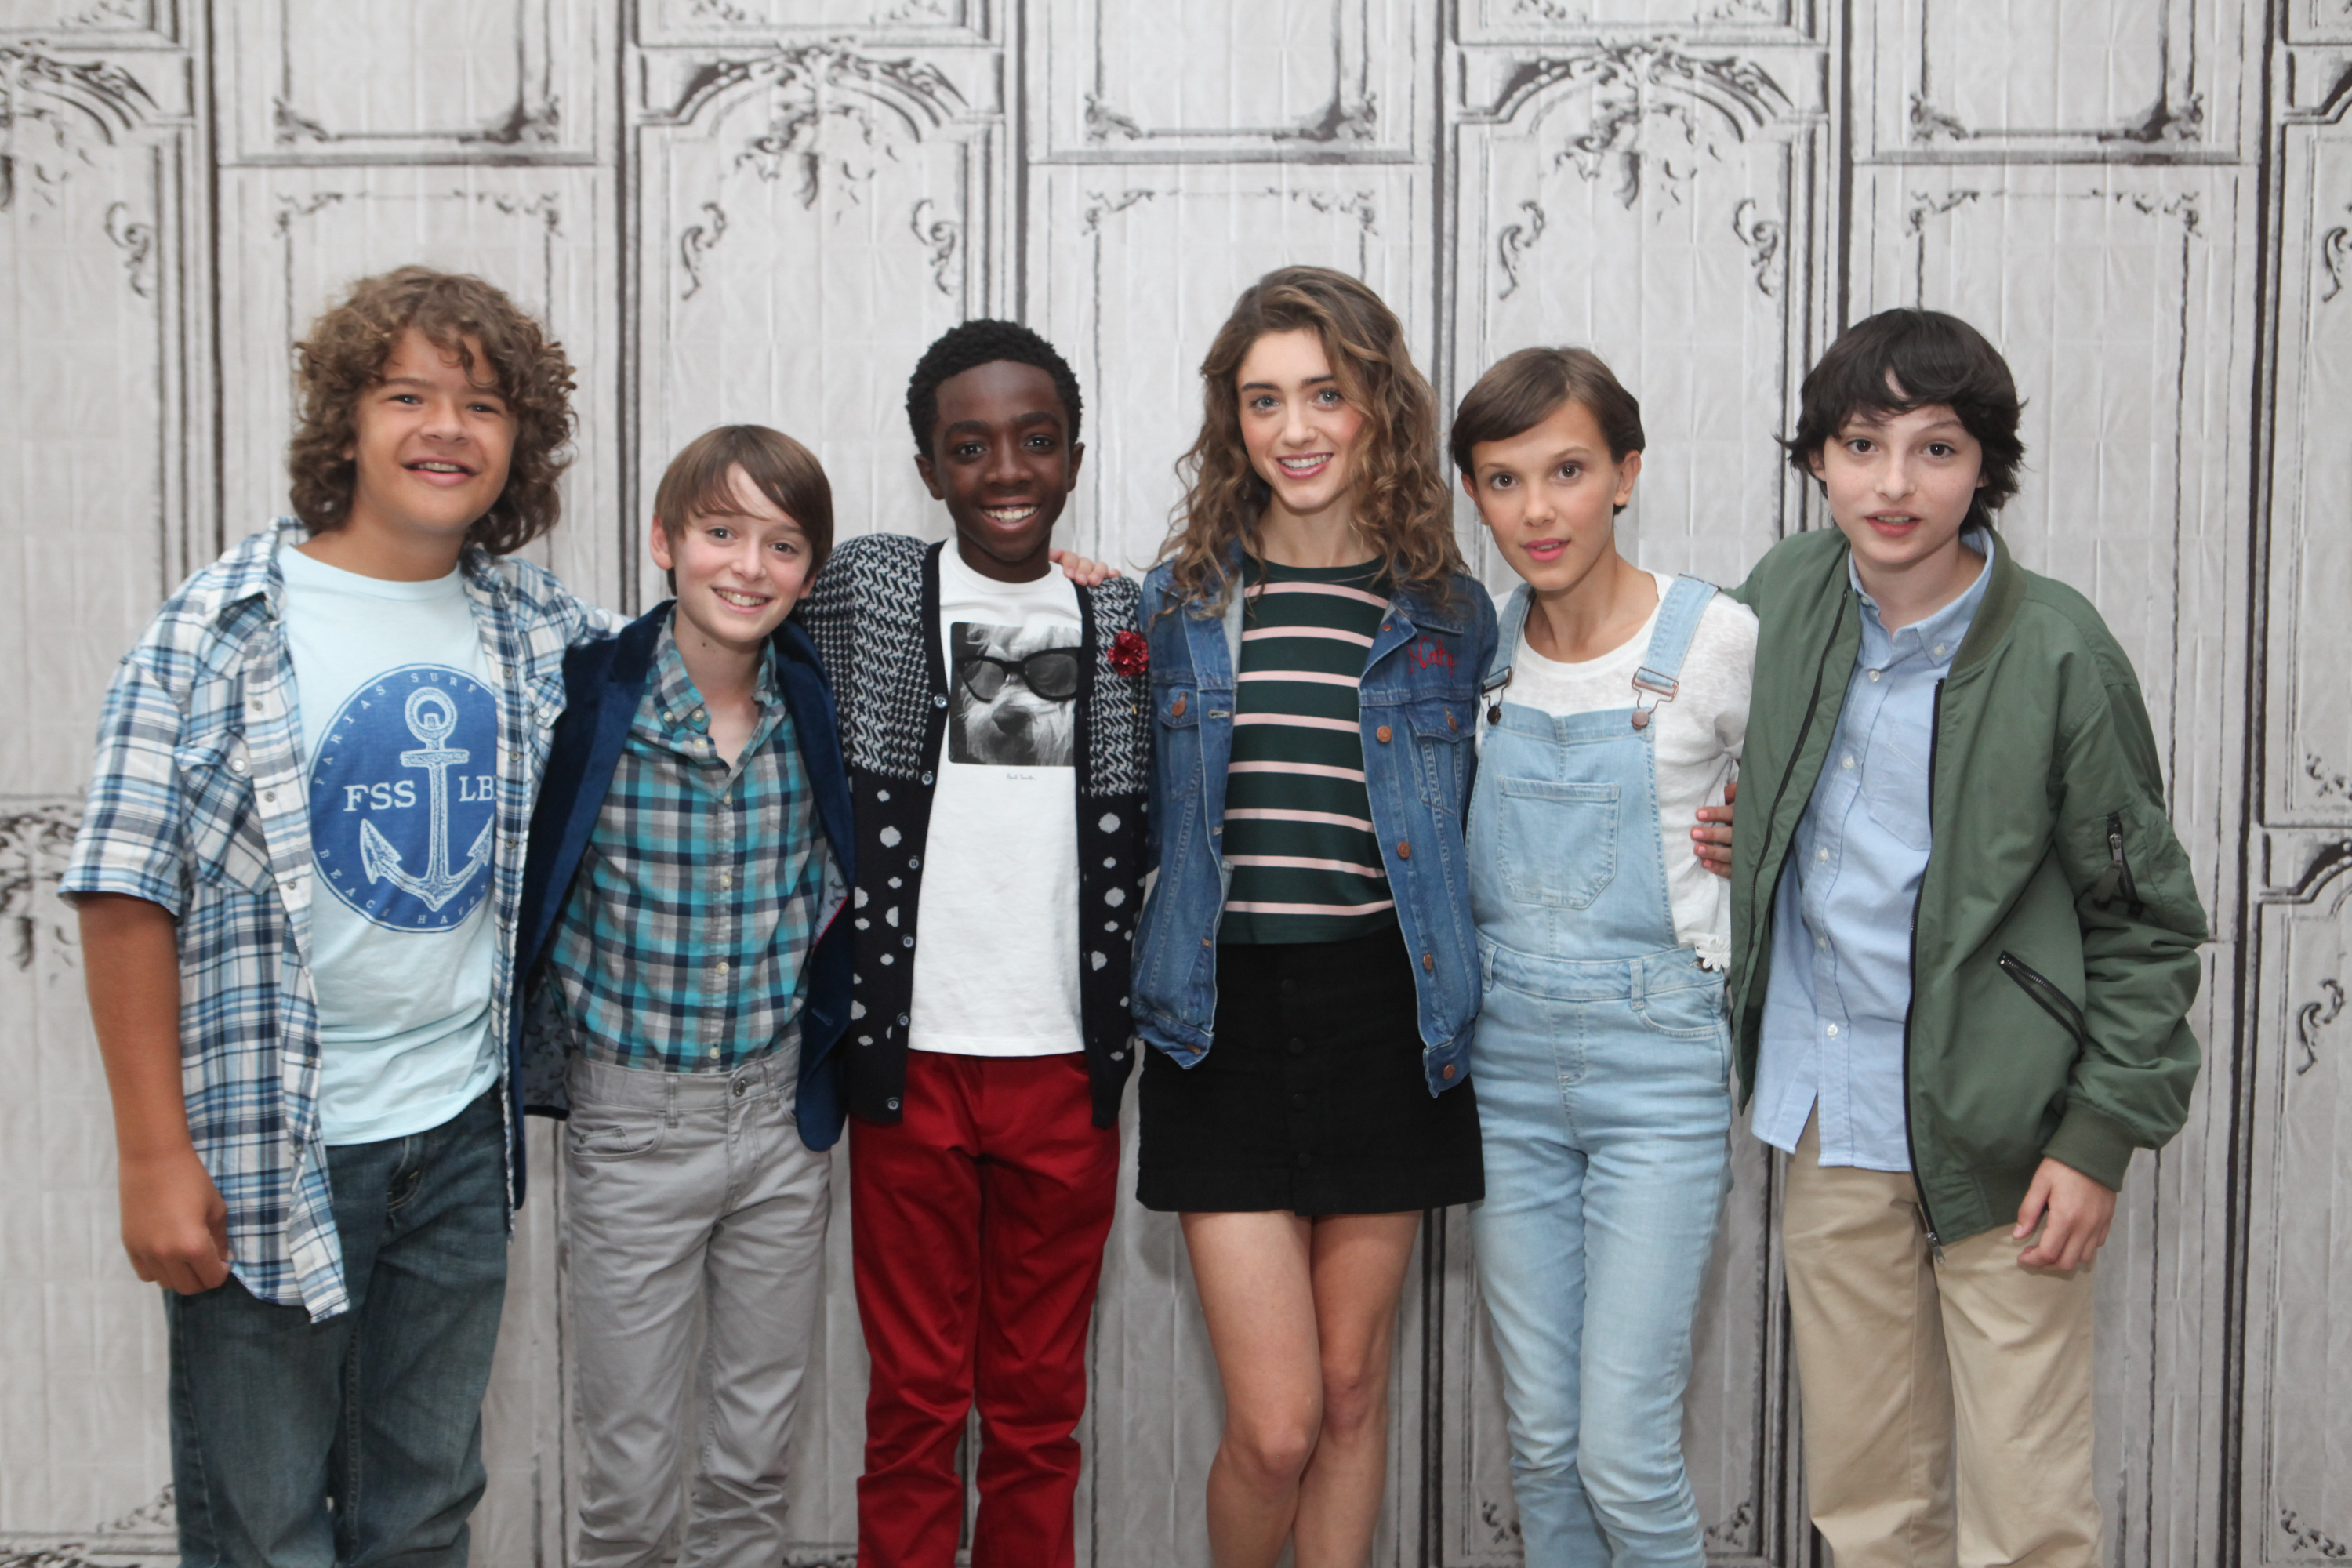 Stranger Things': How to Get Cast Netflix's Hit Series